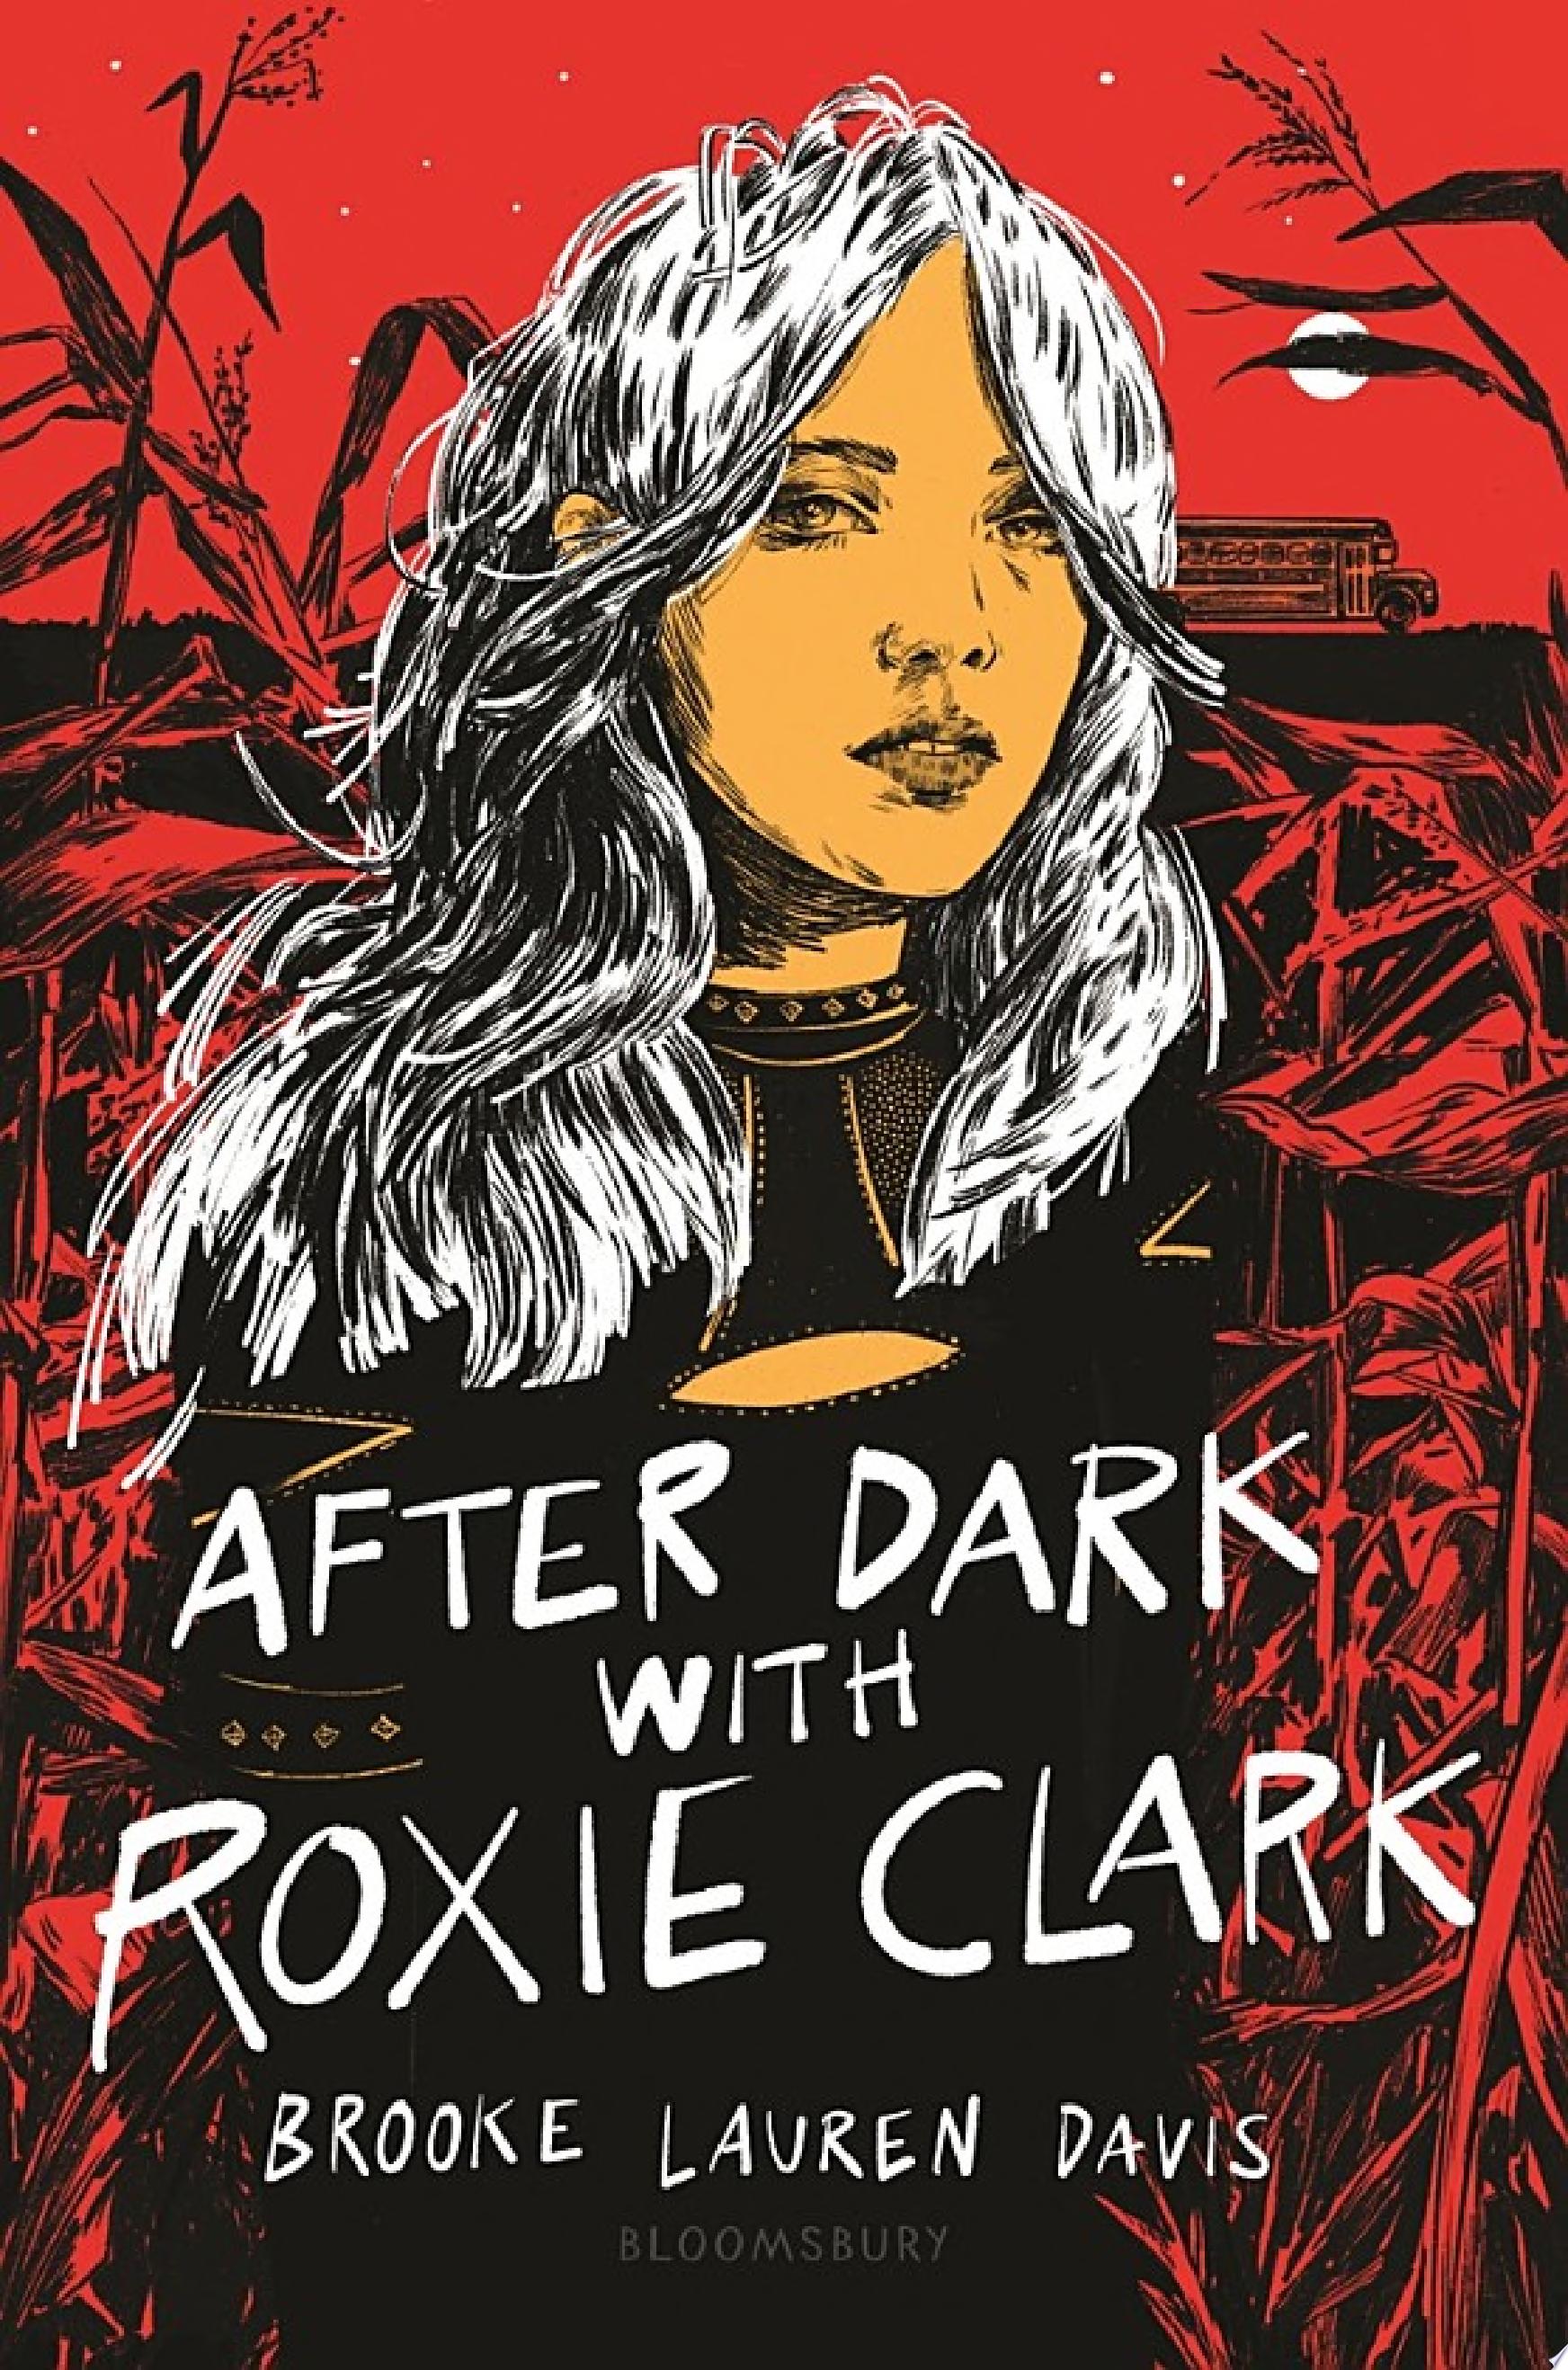 Image for "After Dark with Roxie Clark"